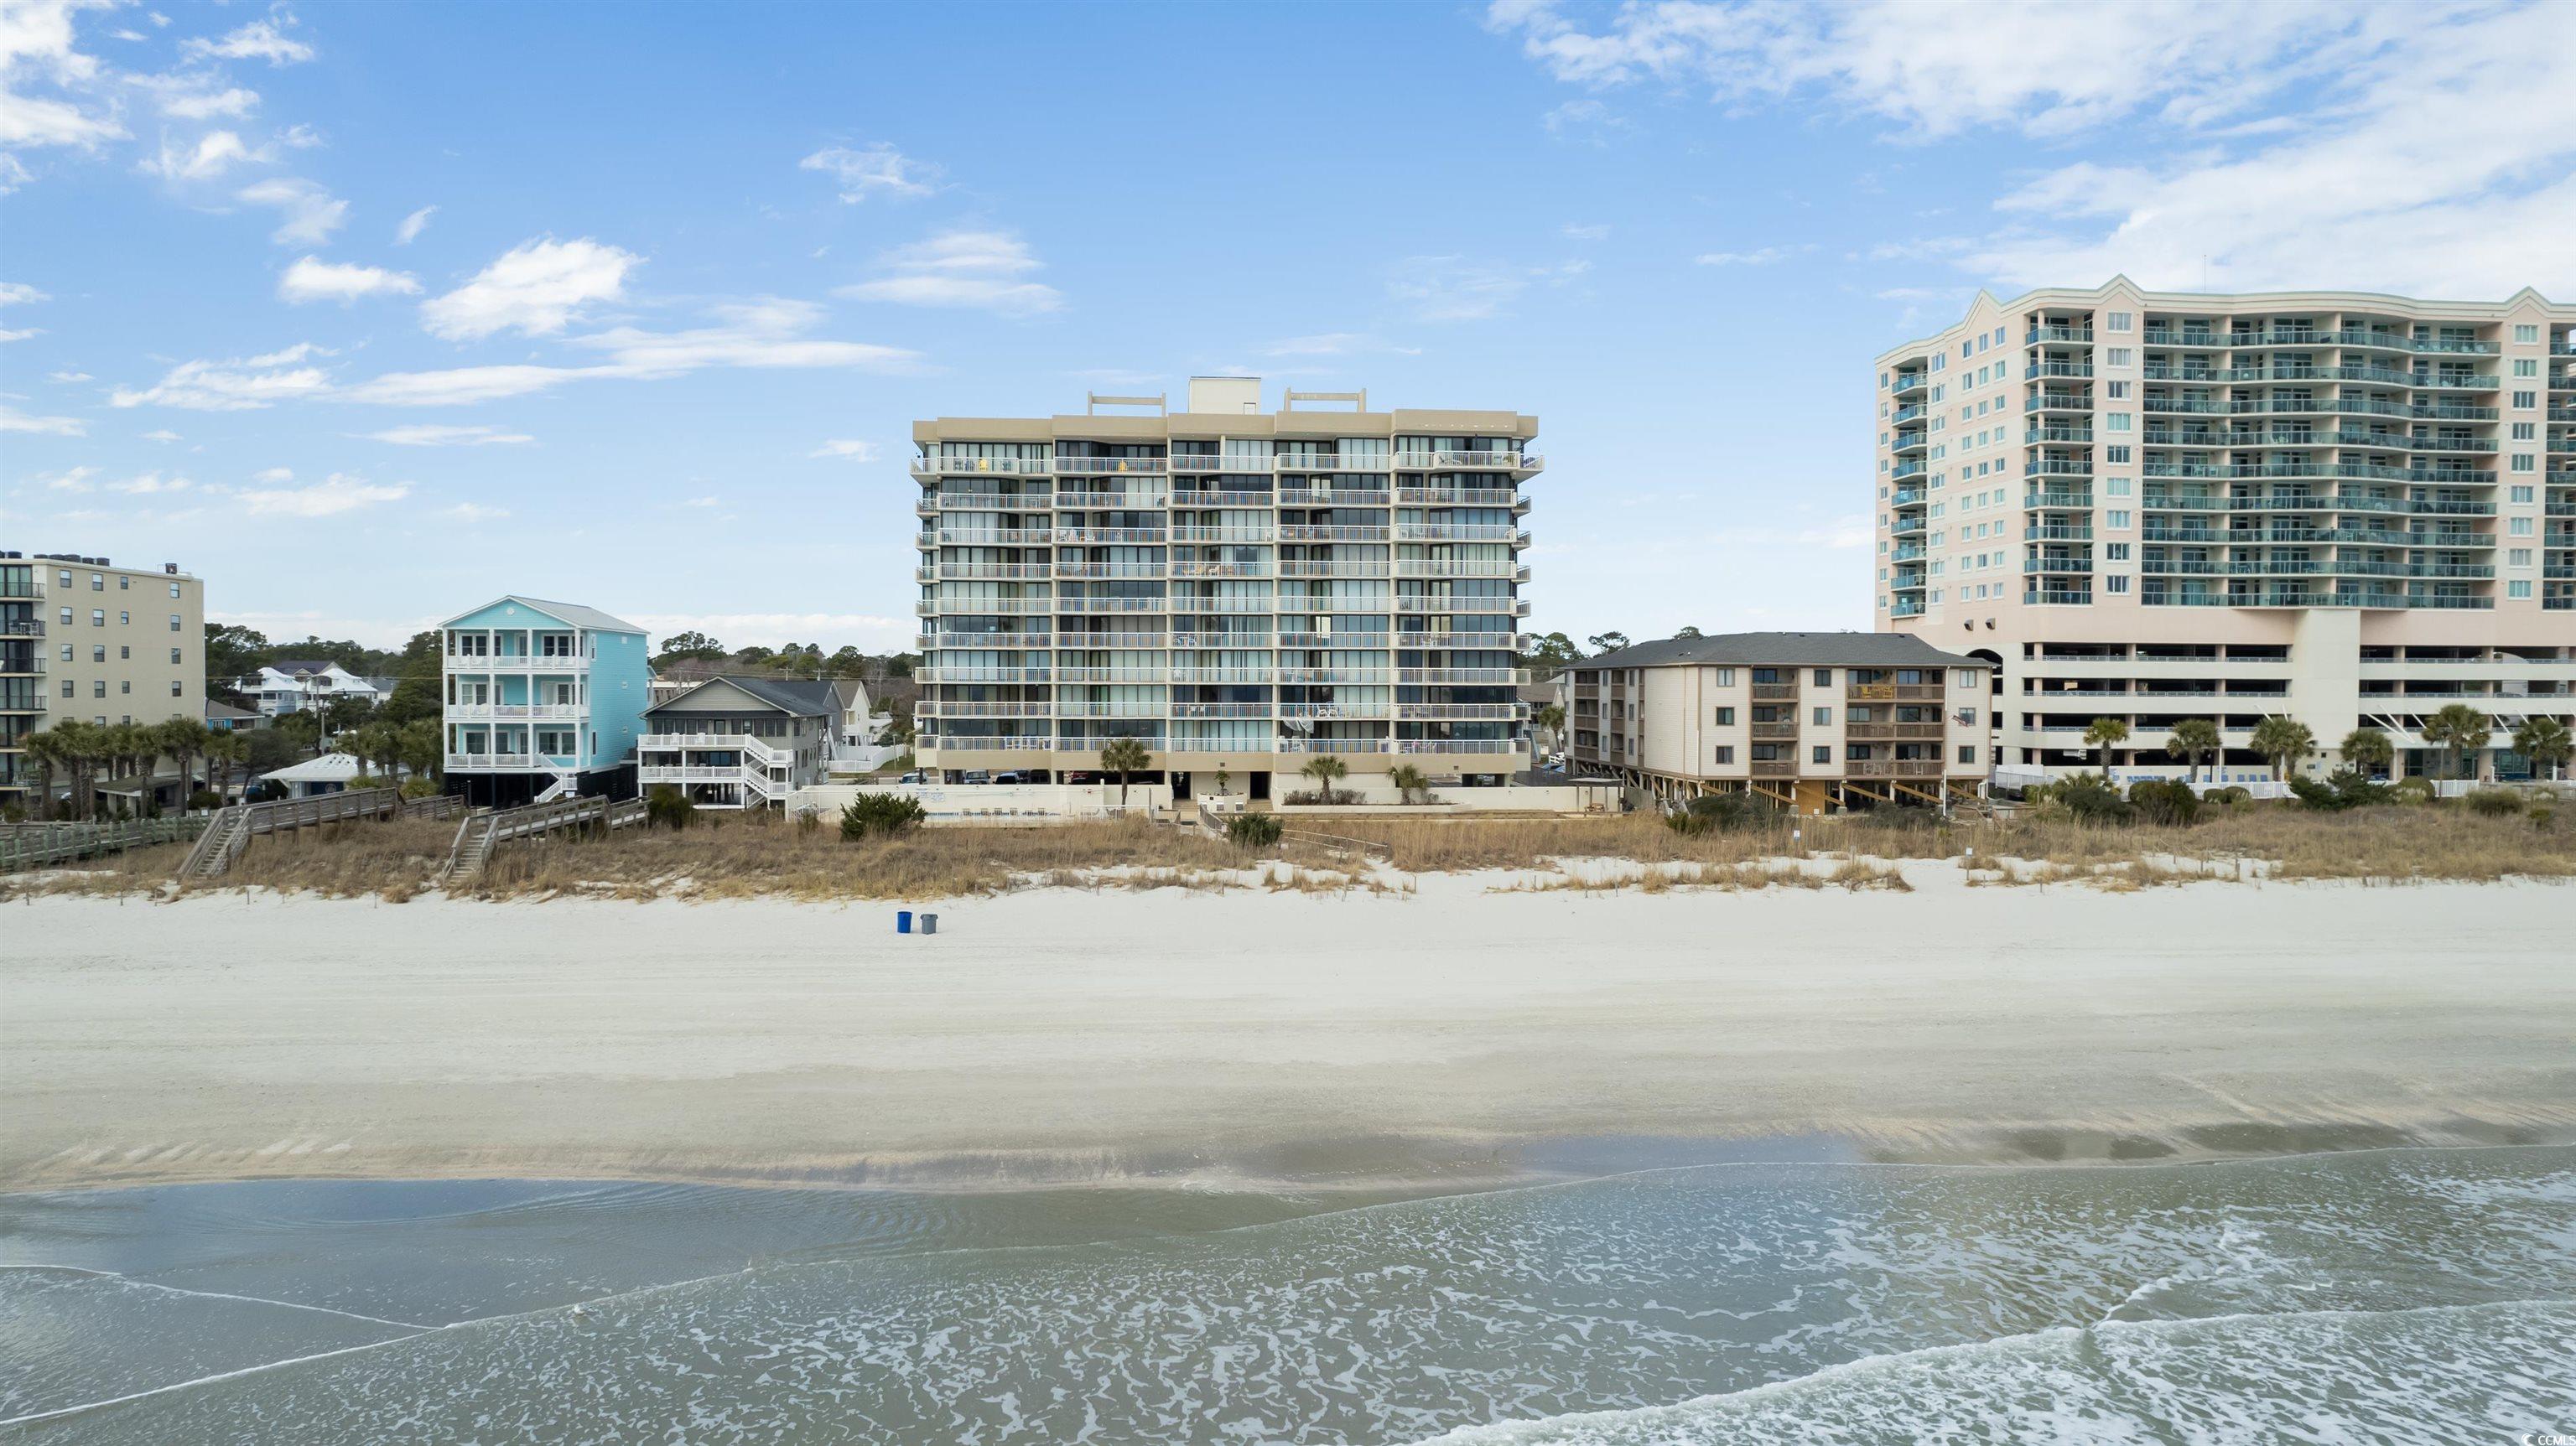 rare opportunity to own a spacious, direct oceanfront condo boasting three bedrooms and two baths in shoreham towers ii, north myrtle beach. enjoy breathtaking ocean views from both the living room and owner's suite. recent upgrades include new beachfront windows and sliding doors, as well as new lvp flooring in bedrooms and new light fixtures throughout.  the kitchen is equipped with stainless steel appliances and granite countertops, perfect for culinary enthusiasts. additional features include a wet bar in the living room and a convenient full-size washer and dryer within the condo.  this fully furnished unit, excluding electronics, offers added convenience with a first-floor storage closet for beach essentials like chairs and umbrellas. enjoy access to amenities such as the fitness center, outdoor pool, and an ev charging station.  notably, this unit has never been rented, ensuring pristine condition and exclusivity. situated in the sought-after crescent beach section, residents benefit from easy access to attractions like barefoot landing, north myrtle beach sports complex and aquatic center, golf courses, shopping destinations, and dining options.  opportunities like this are rare—don't miss out!  information deemed reliable but not guaranteed.  buyer responsible for verification.